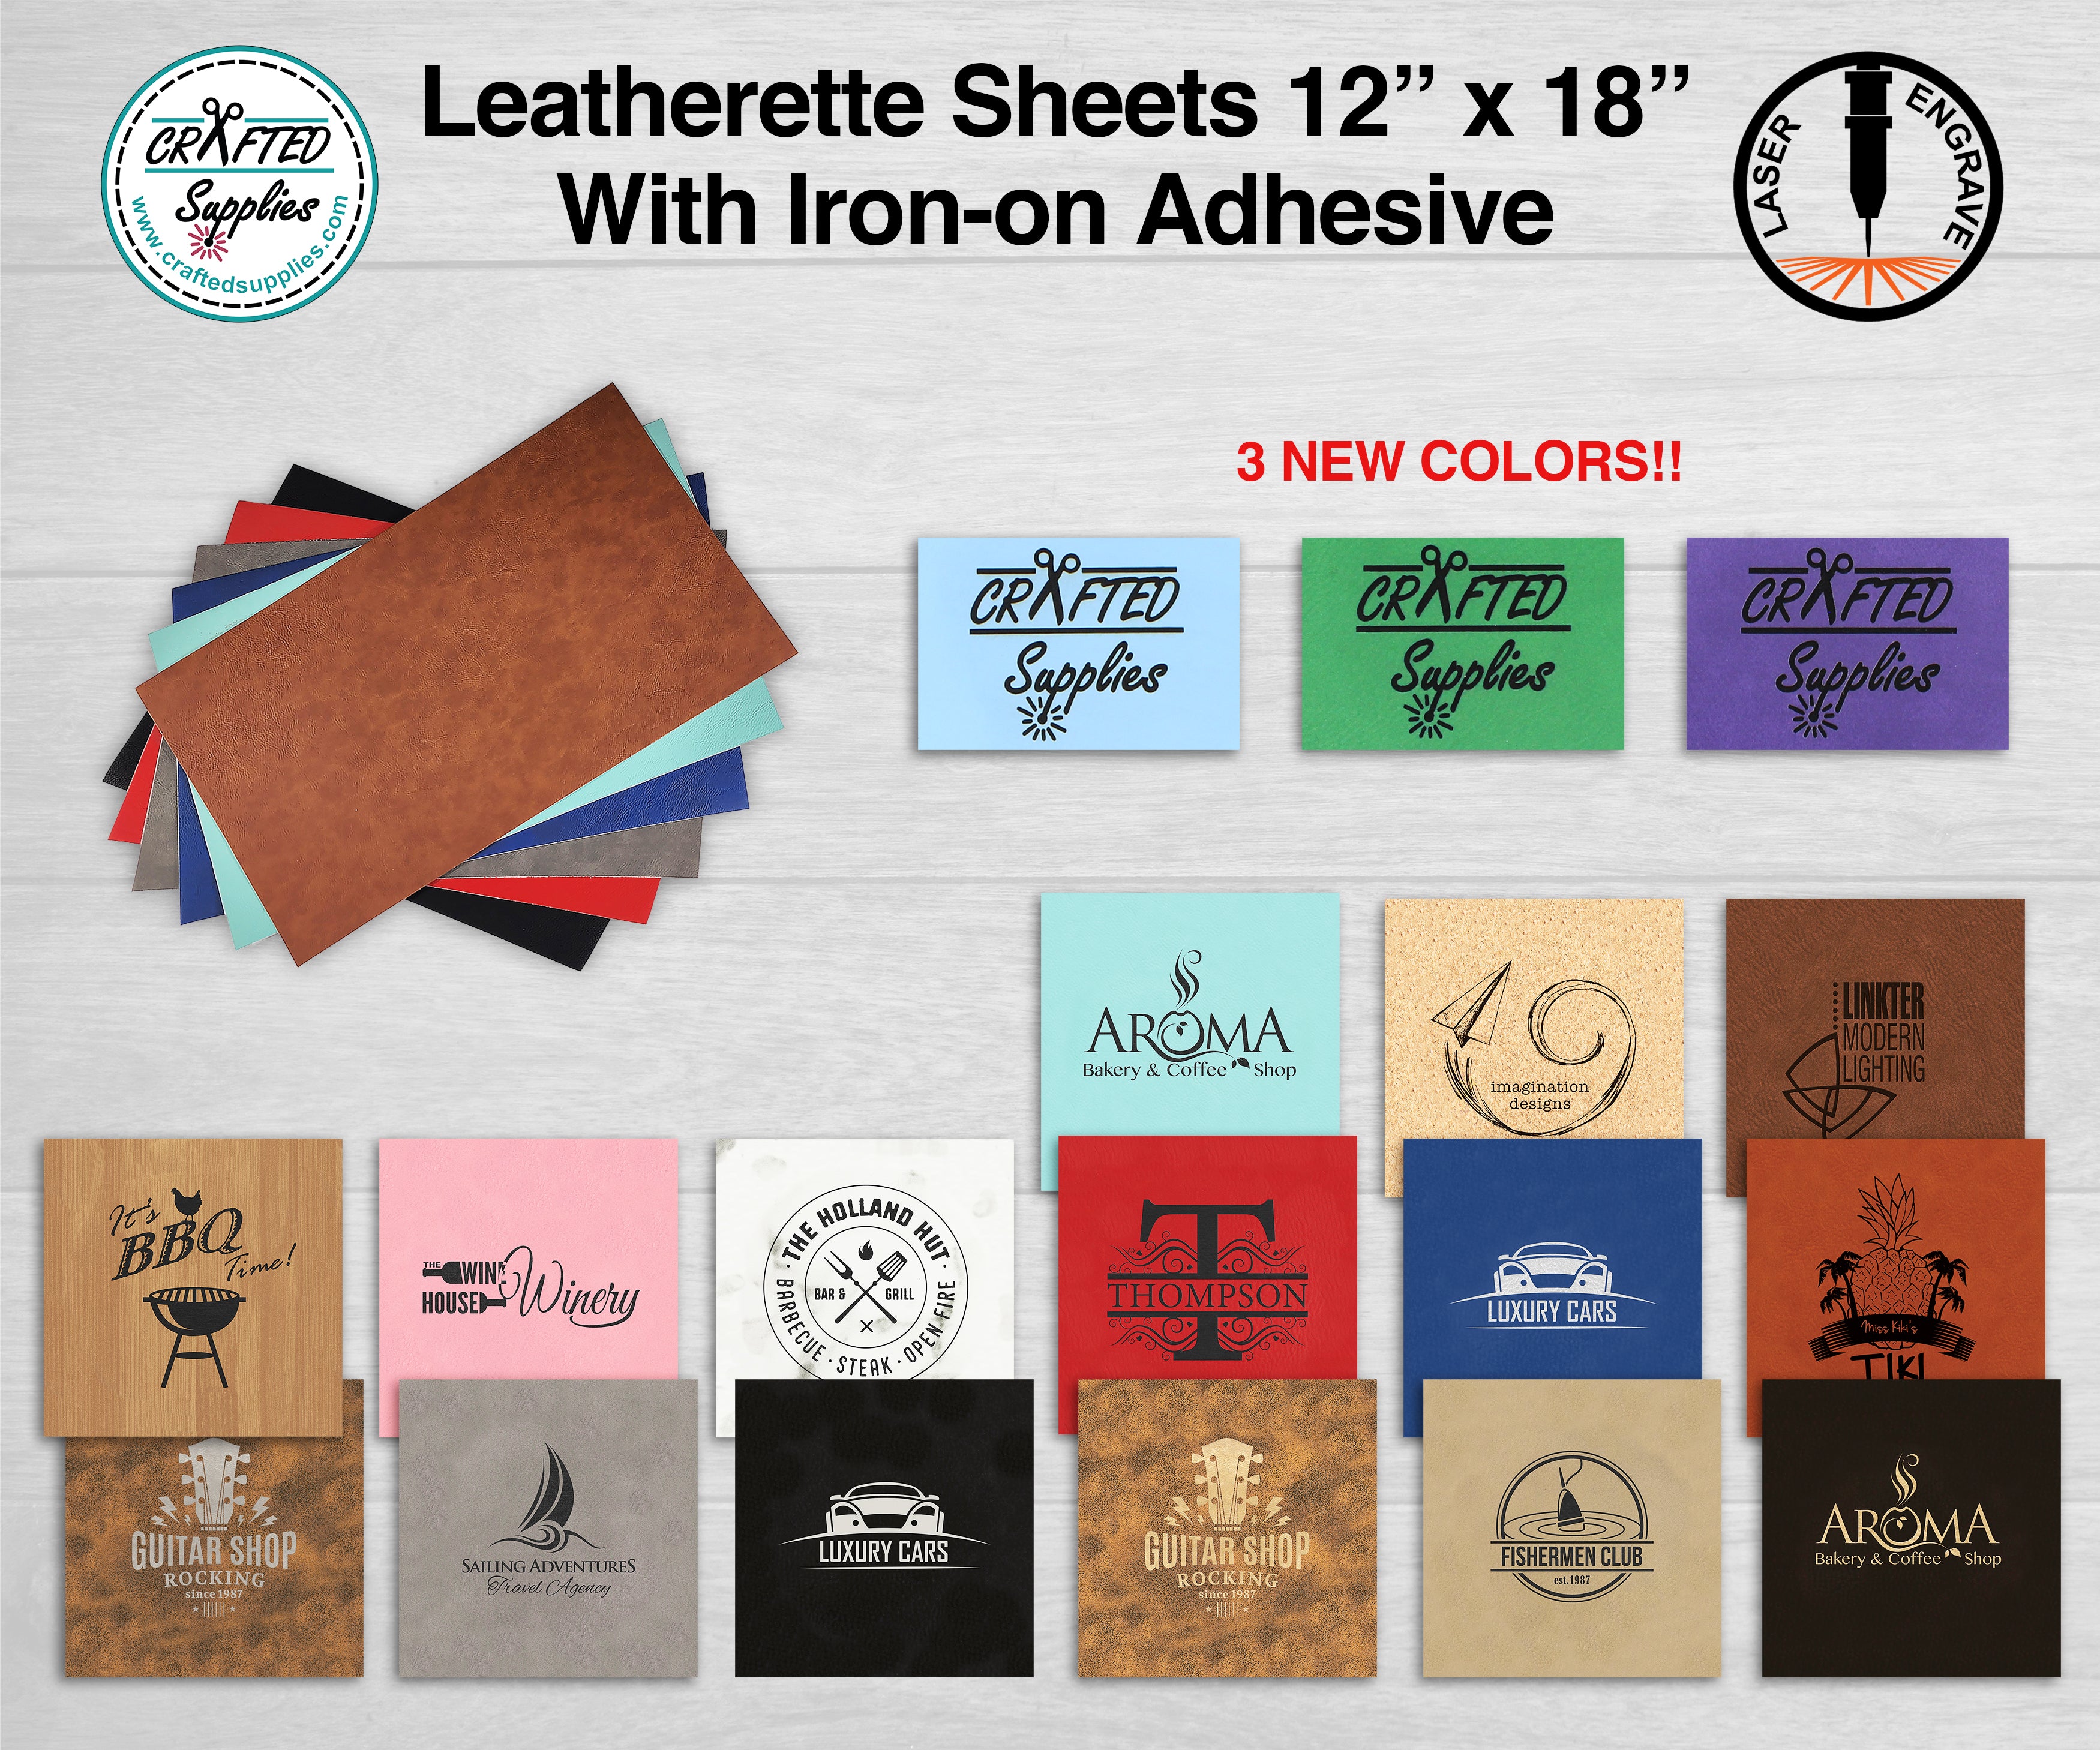 American Personalized Leather Sheets for Laser Engraving with Adhesive Backing, Laserable Leatherette 12 x 18, Glowforge FSL Supplies and Materials (Dark Brown/Black)